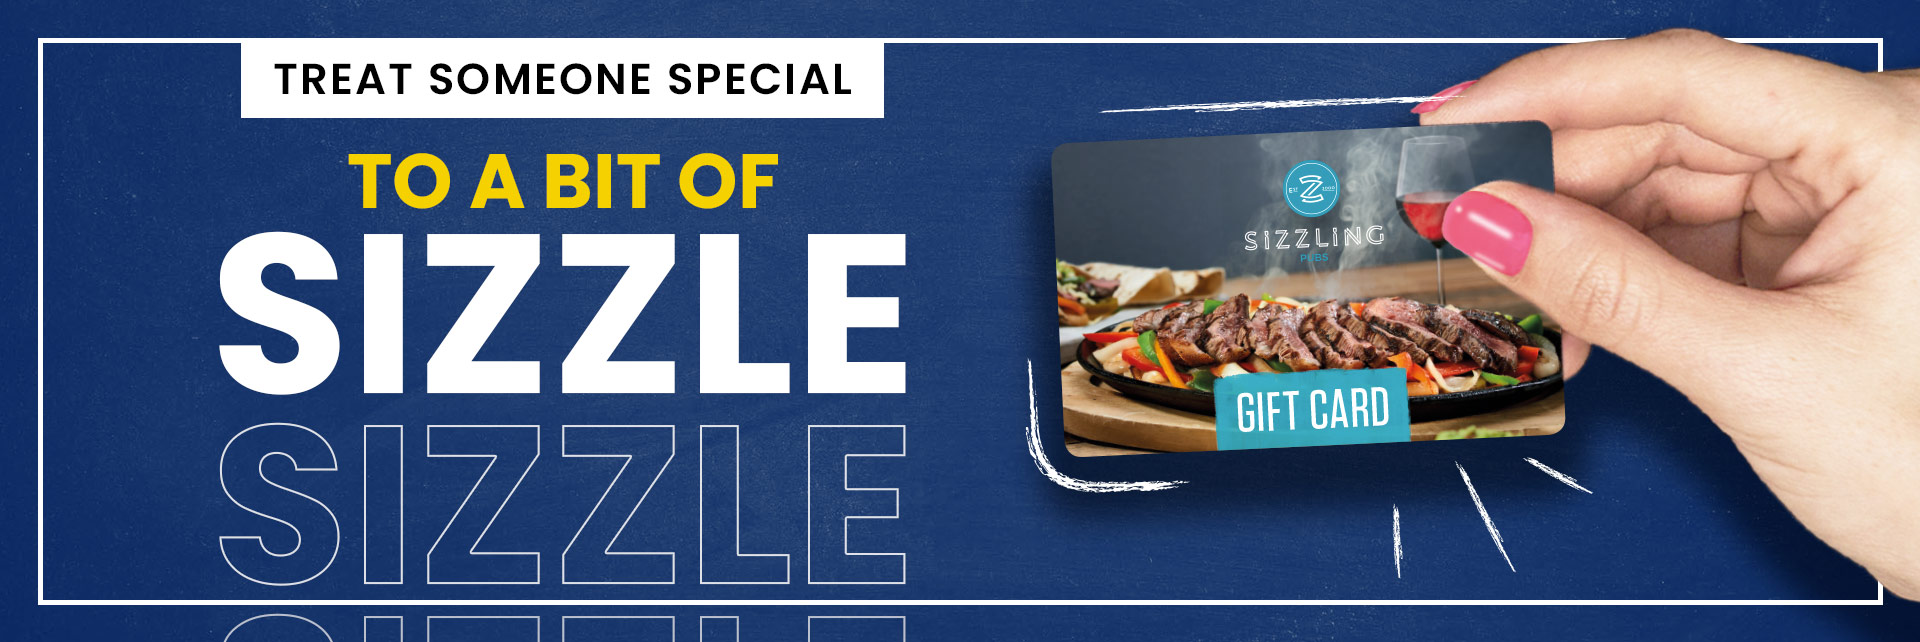 Sizzling Pubs Gift Card at The Wildwood in Stafford